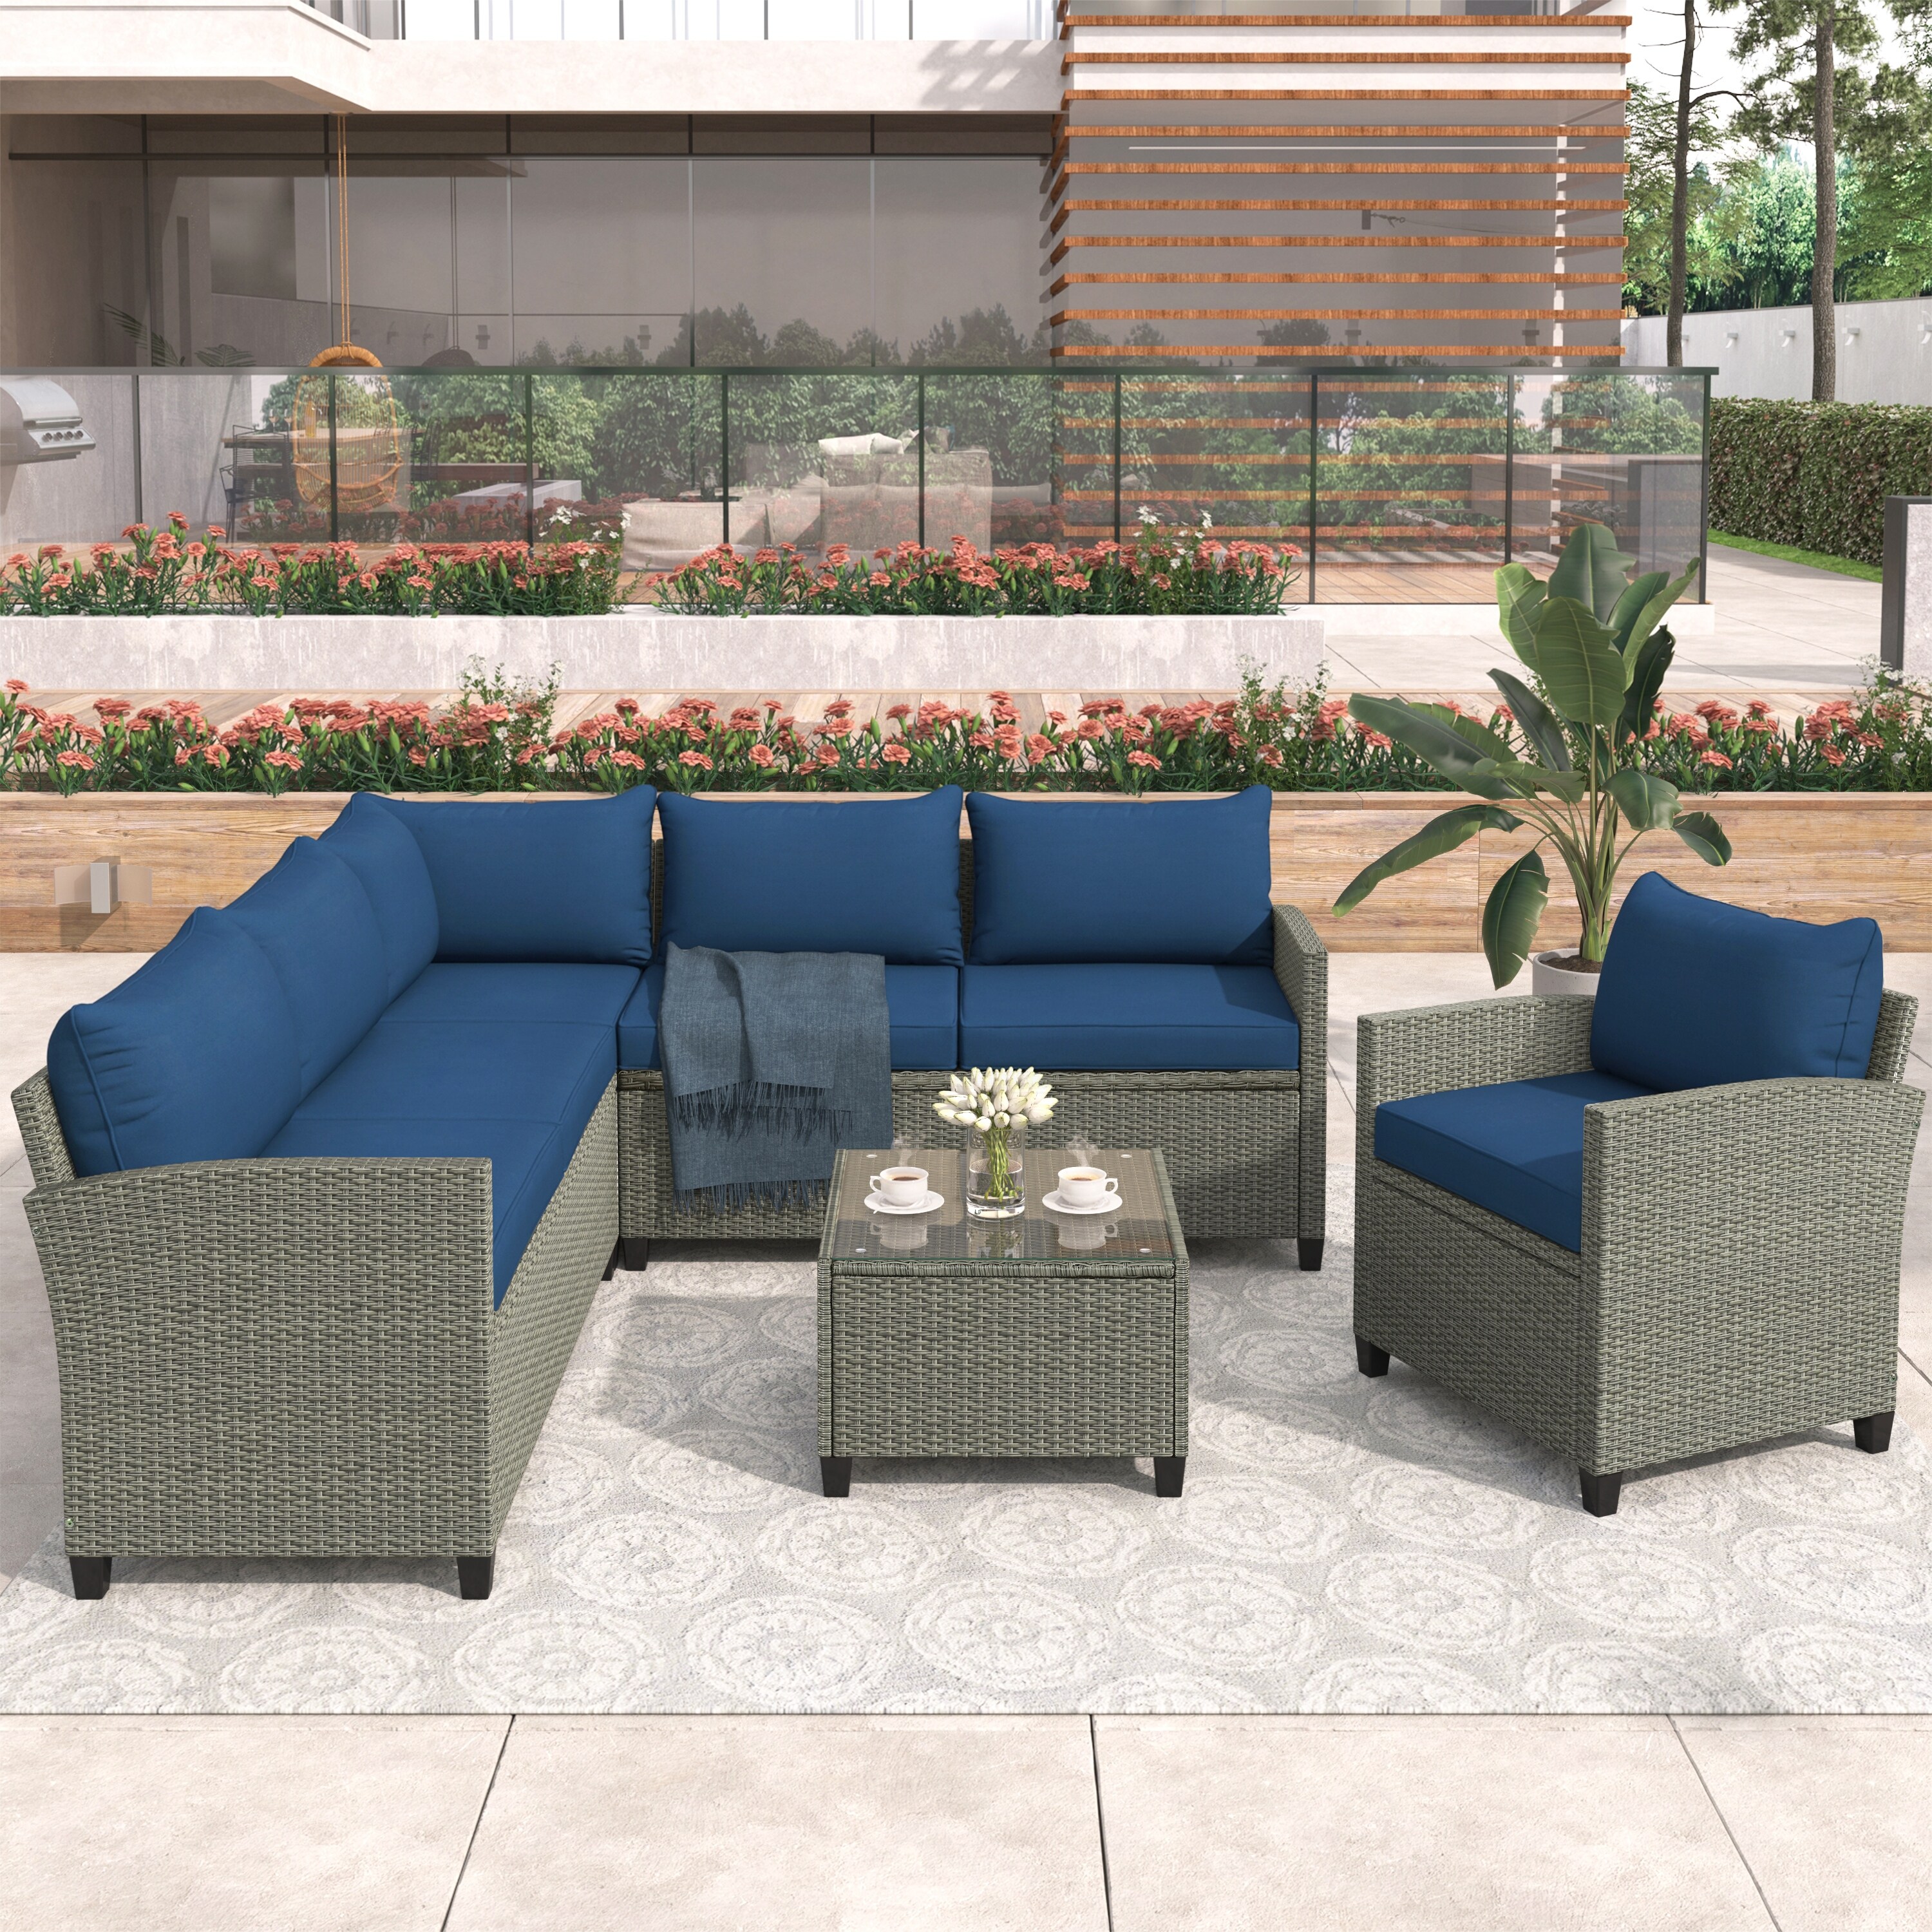 5 Piece Outdoor Conversation Set  Patio Furniture Pe Rattan Sectional Sofa Set With Coffee Table  Cushions And Single Chair